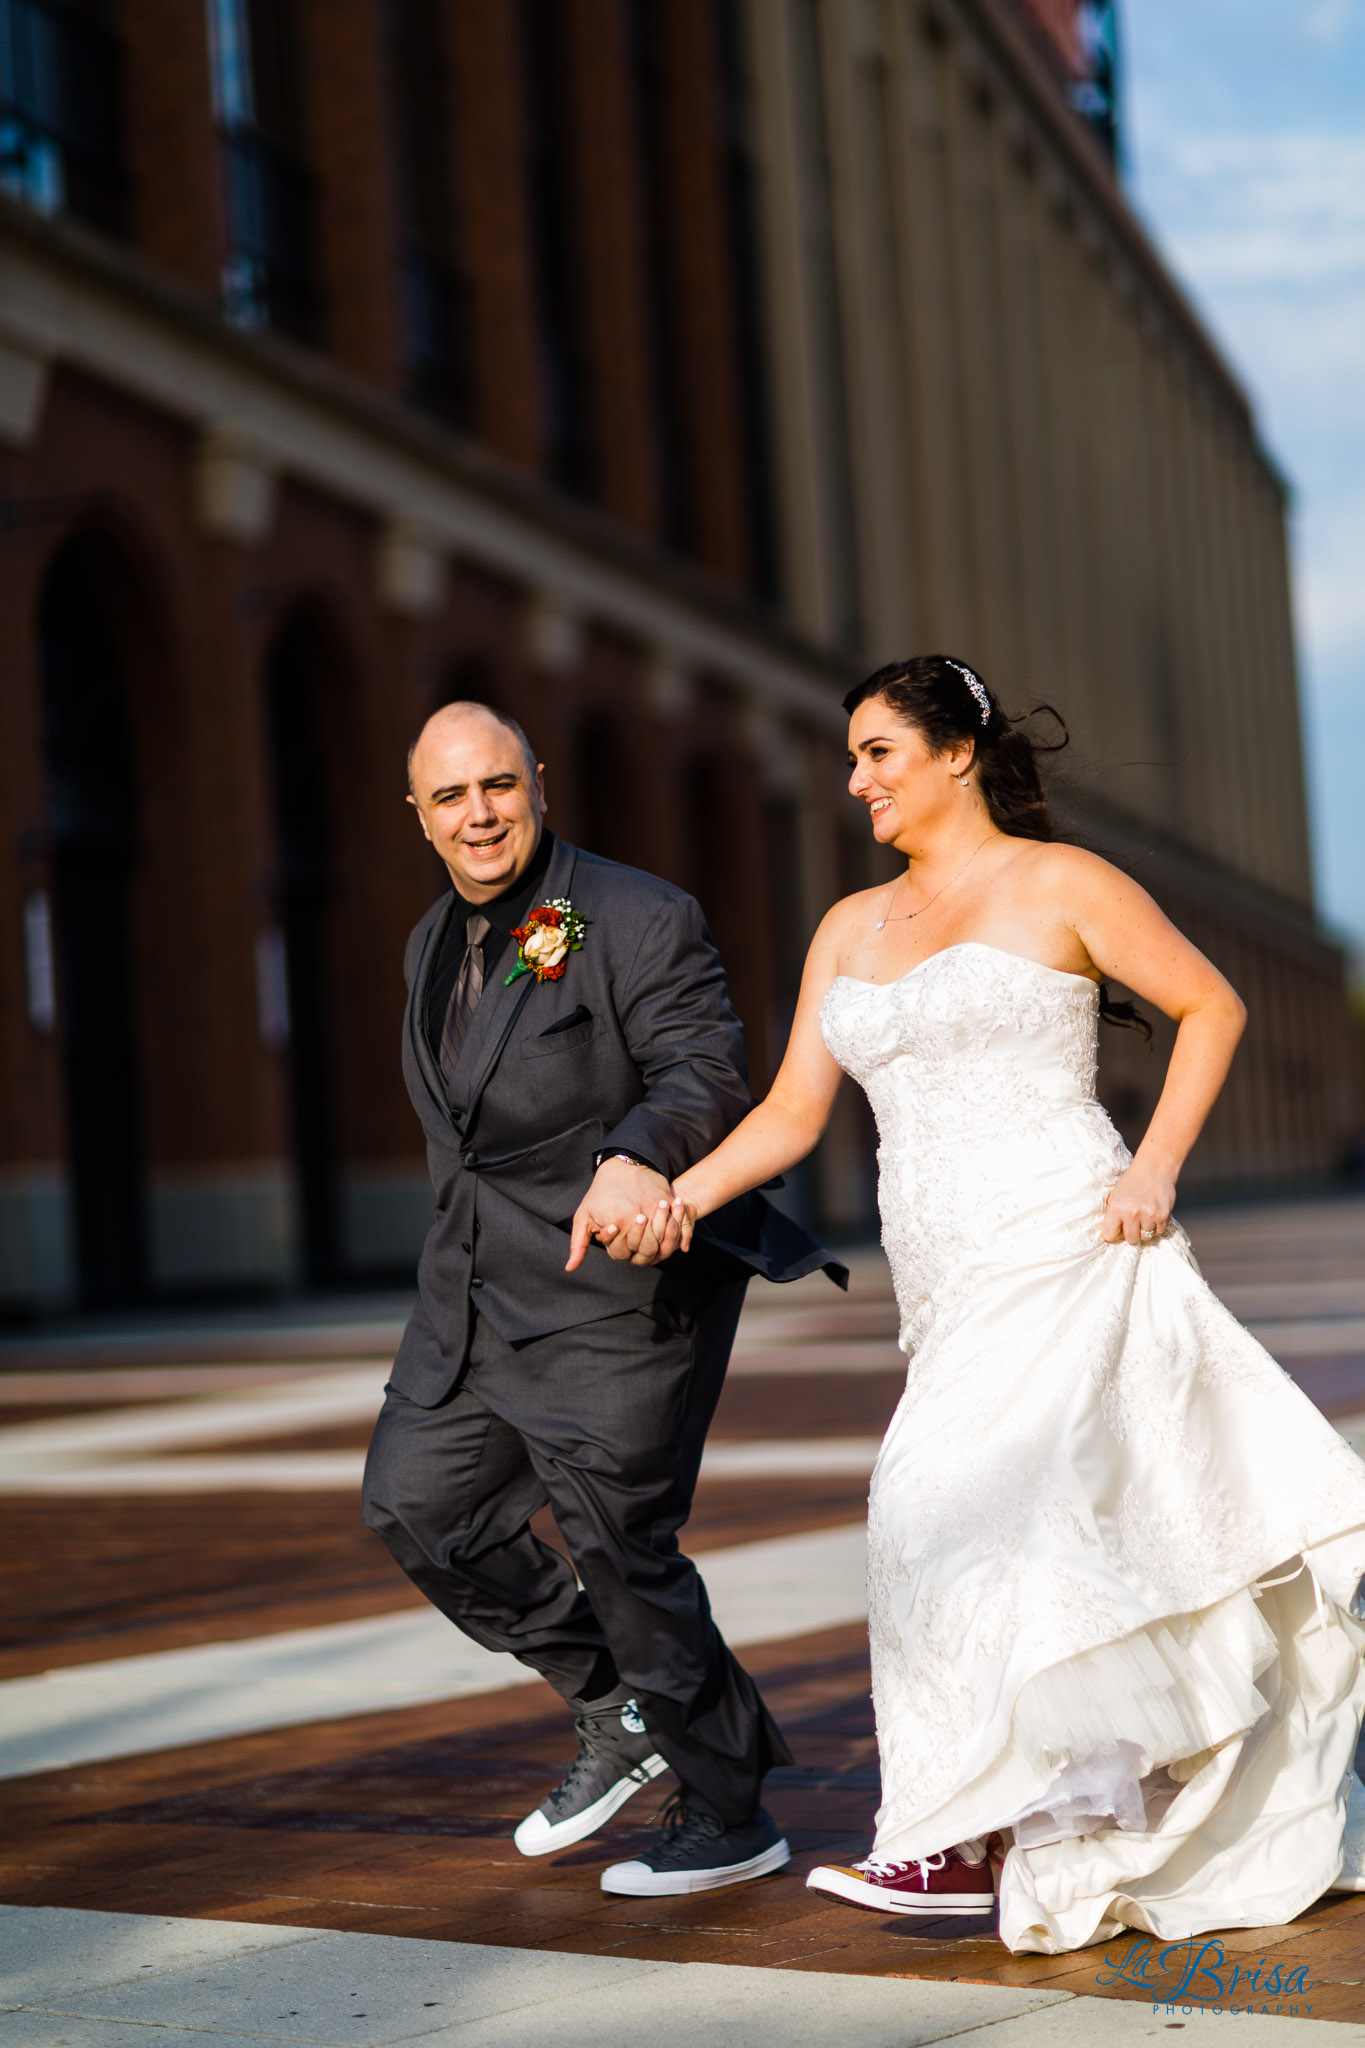 Melanie & Kevin | Wedding Photography Preview | New York, NY | Chris Hsieh